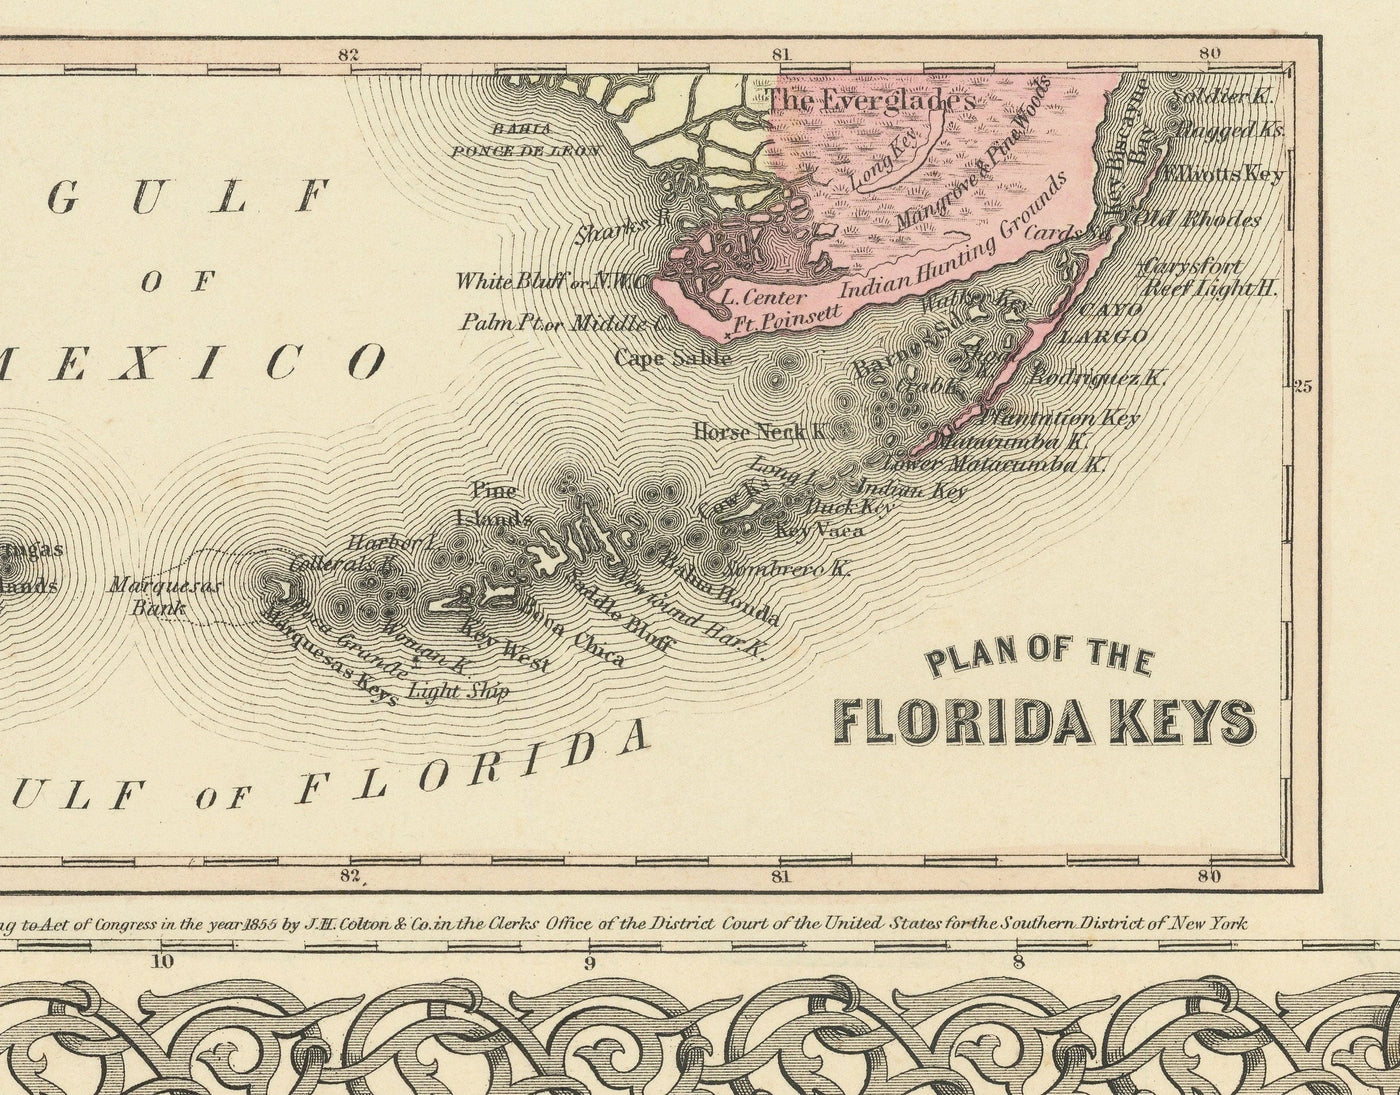 Old Map of Florida in 1855 by Colton - Keys, Panhandle, Jacksonville, Tampa, Dade, Tallahassee, Ft Lauderdale